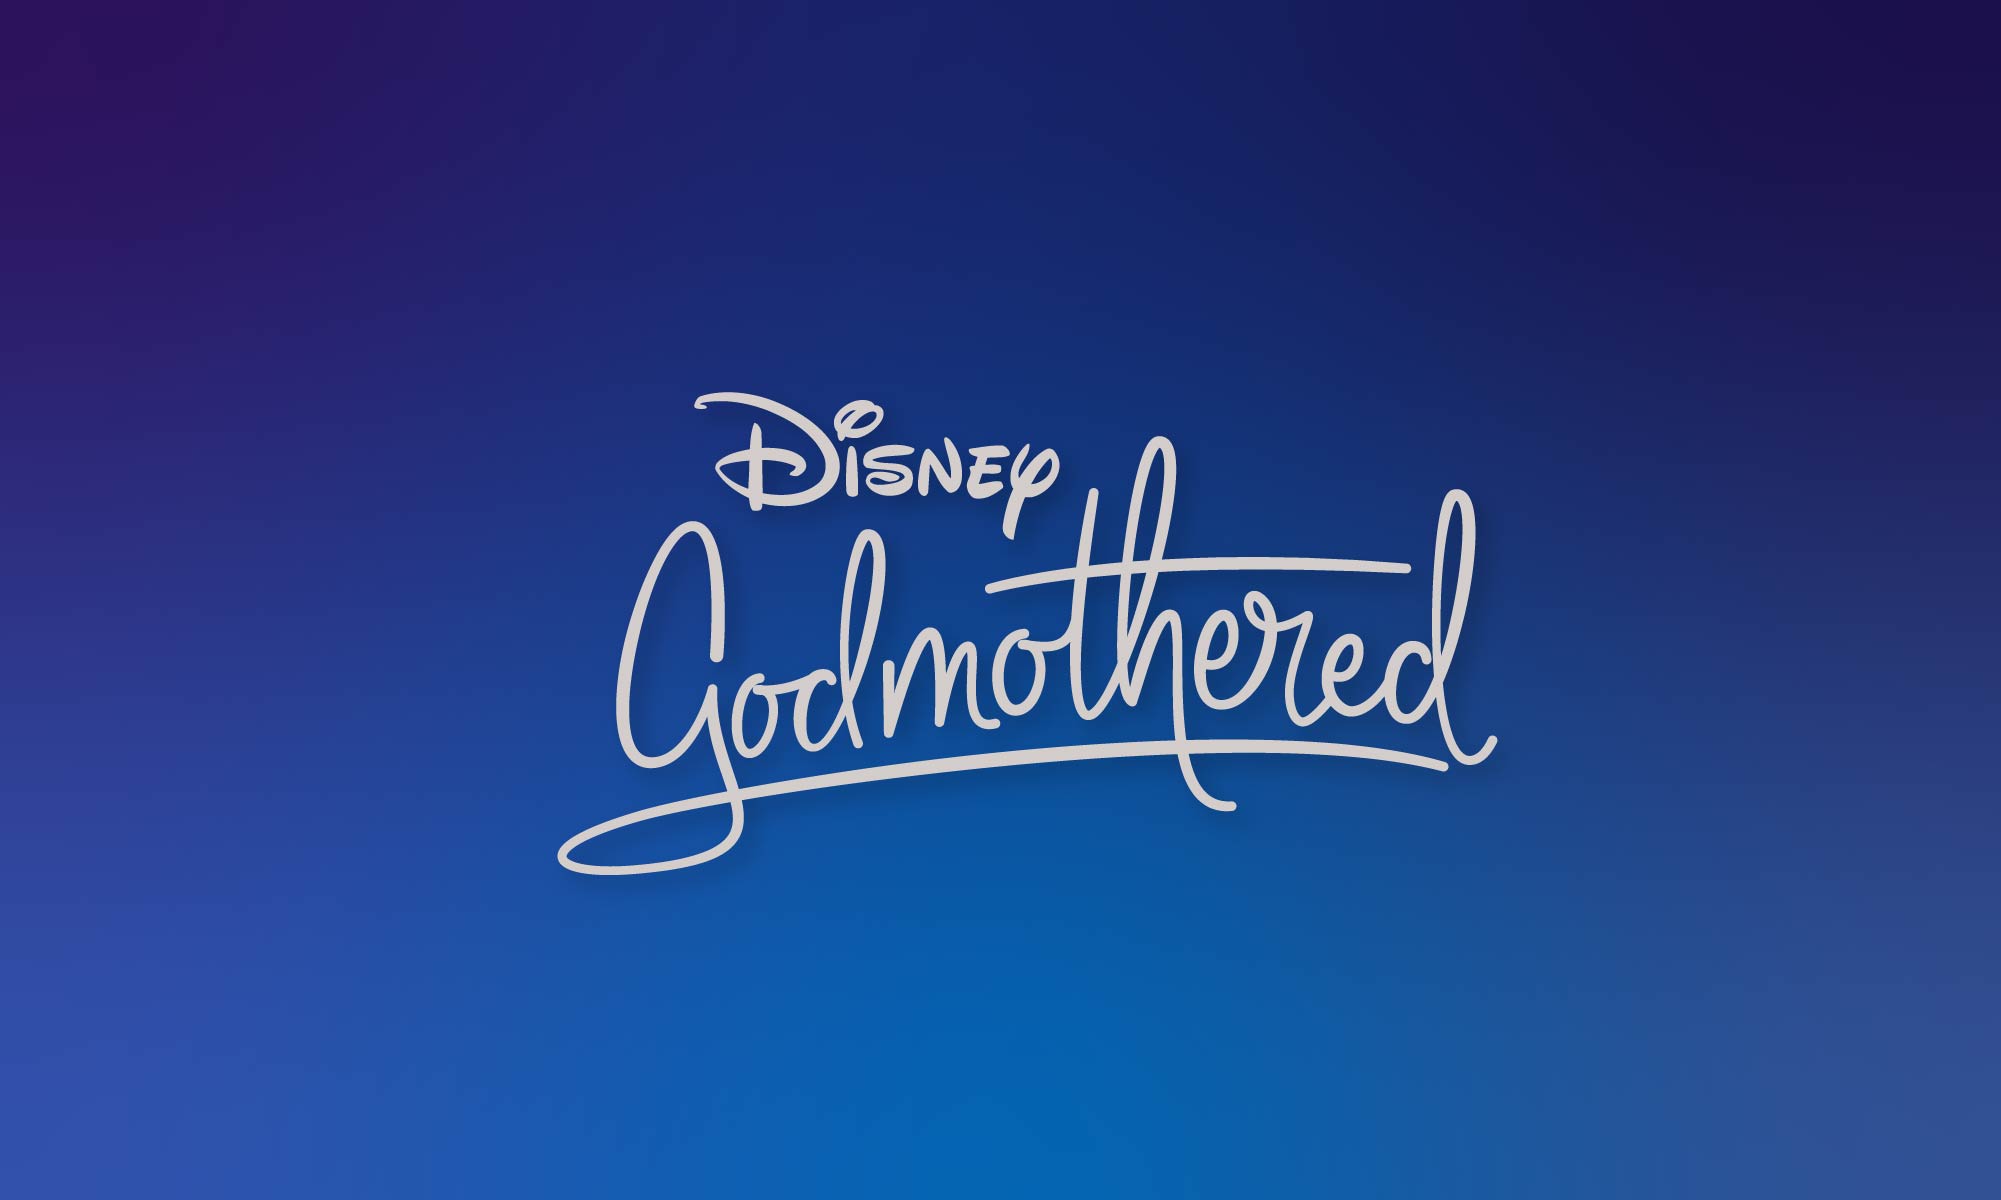 Godmothered Disney Title Treatment by Hoodzpah featuring a midcentury modern script